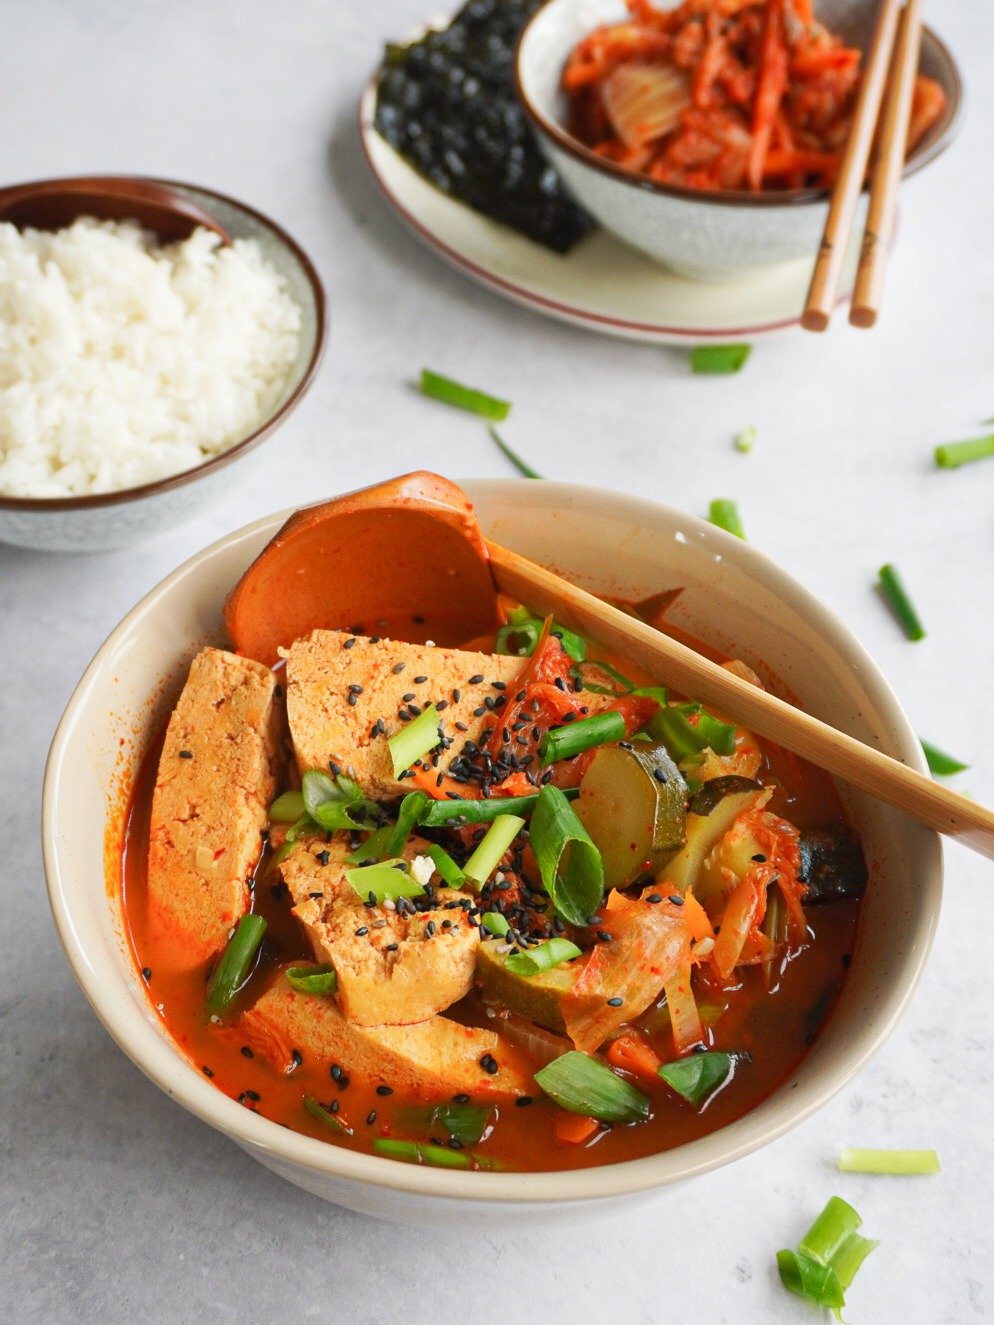 A vegan friendly Kimchi Jjigae is very hard to come by! This bowl has a mix of tasty, healthy ingredients, all vegan friendly.